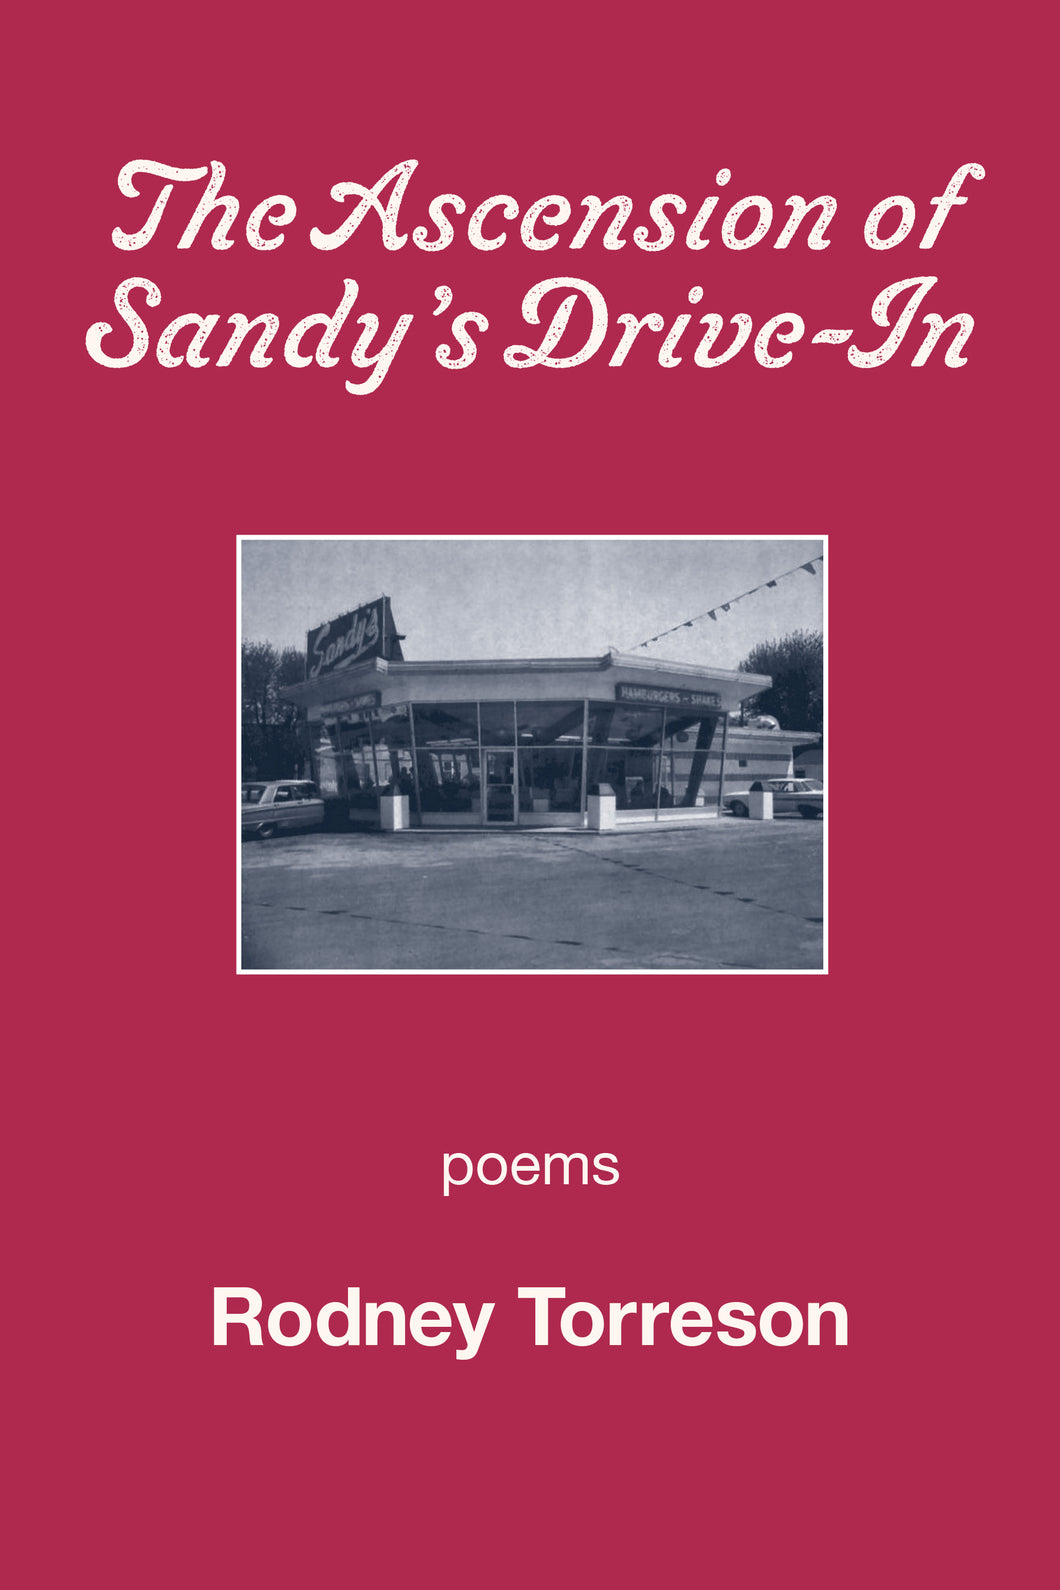 The Ascension of Sandy’s Drive-In